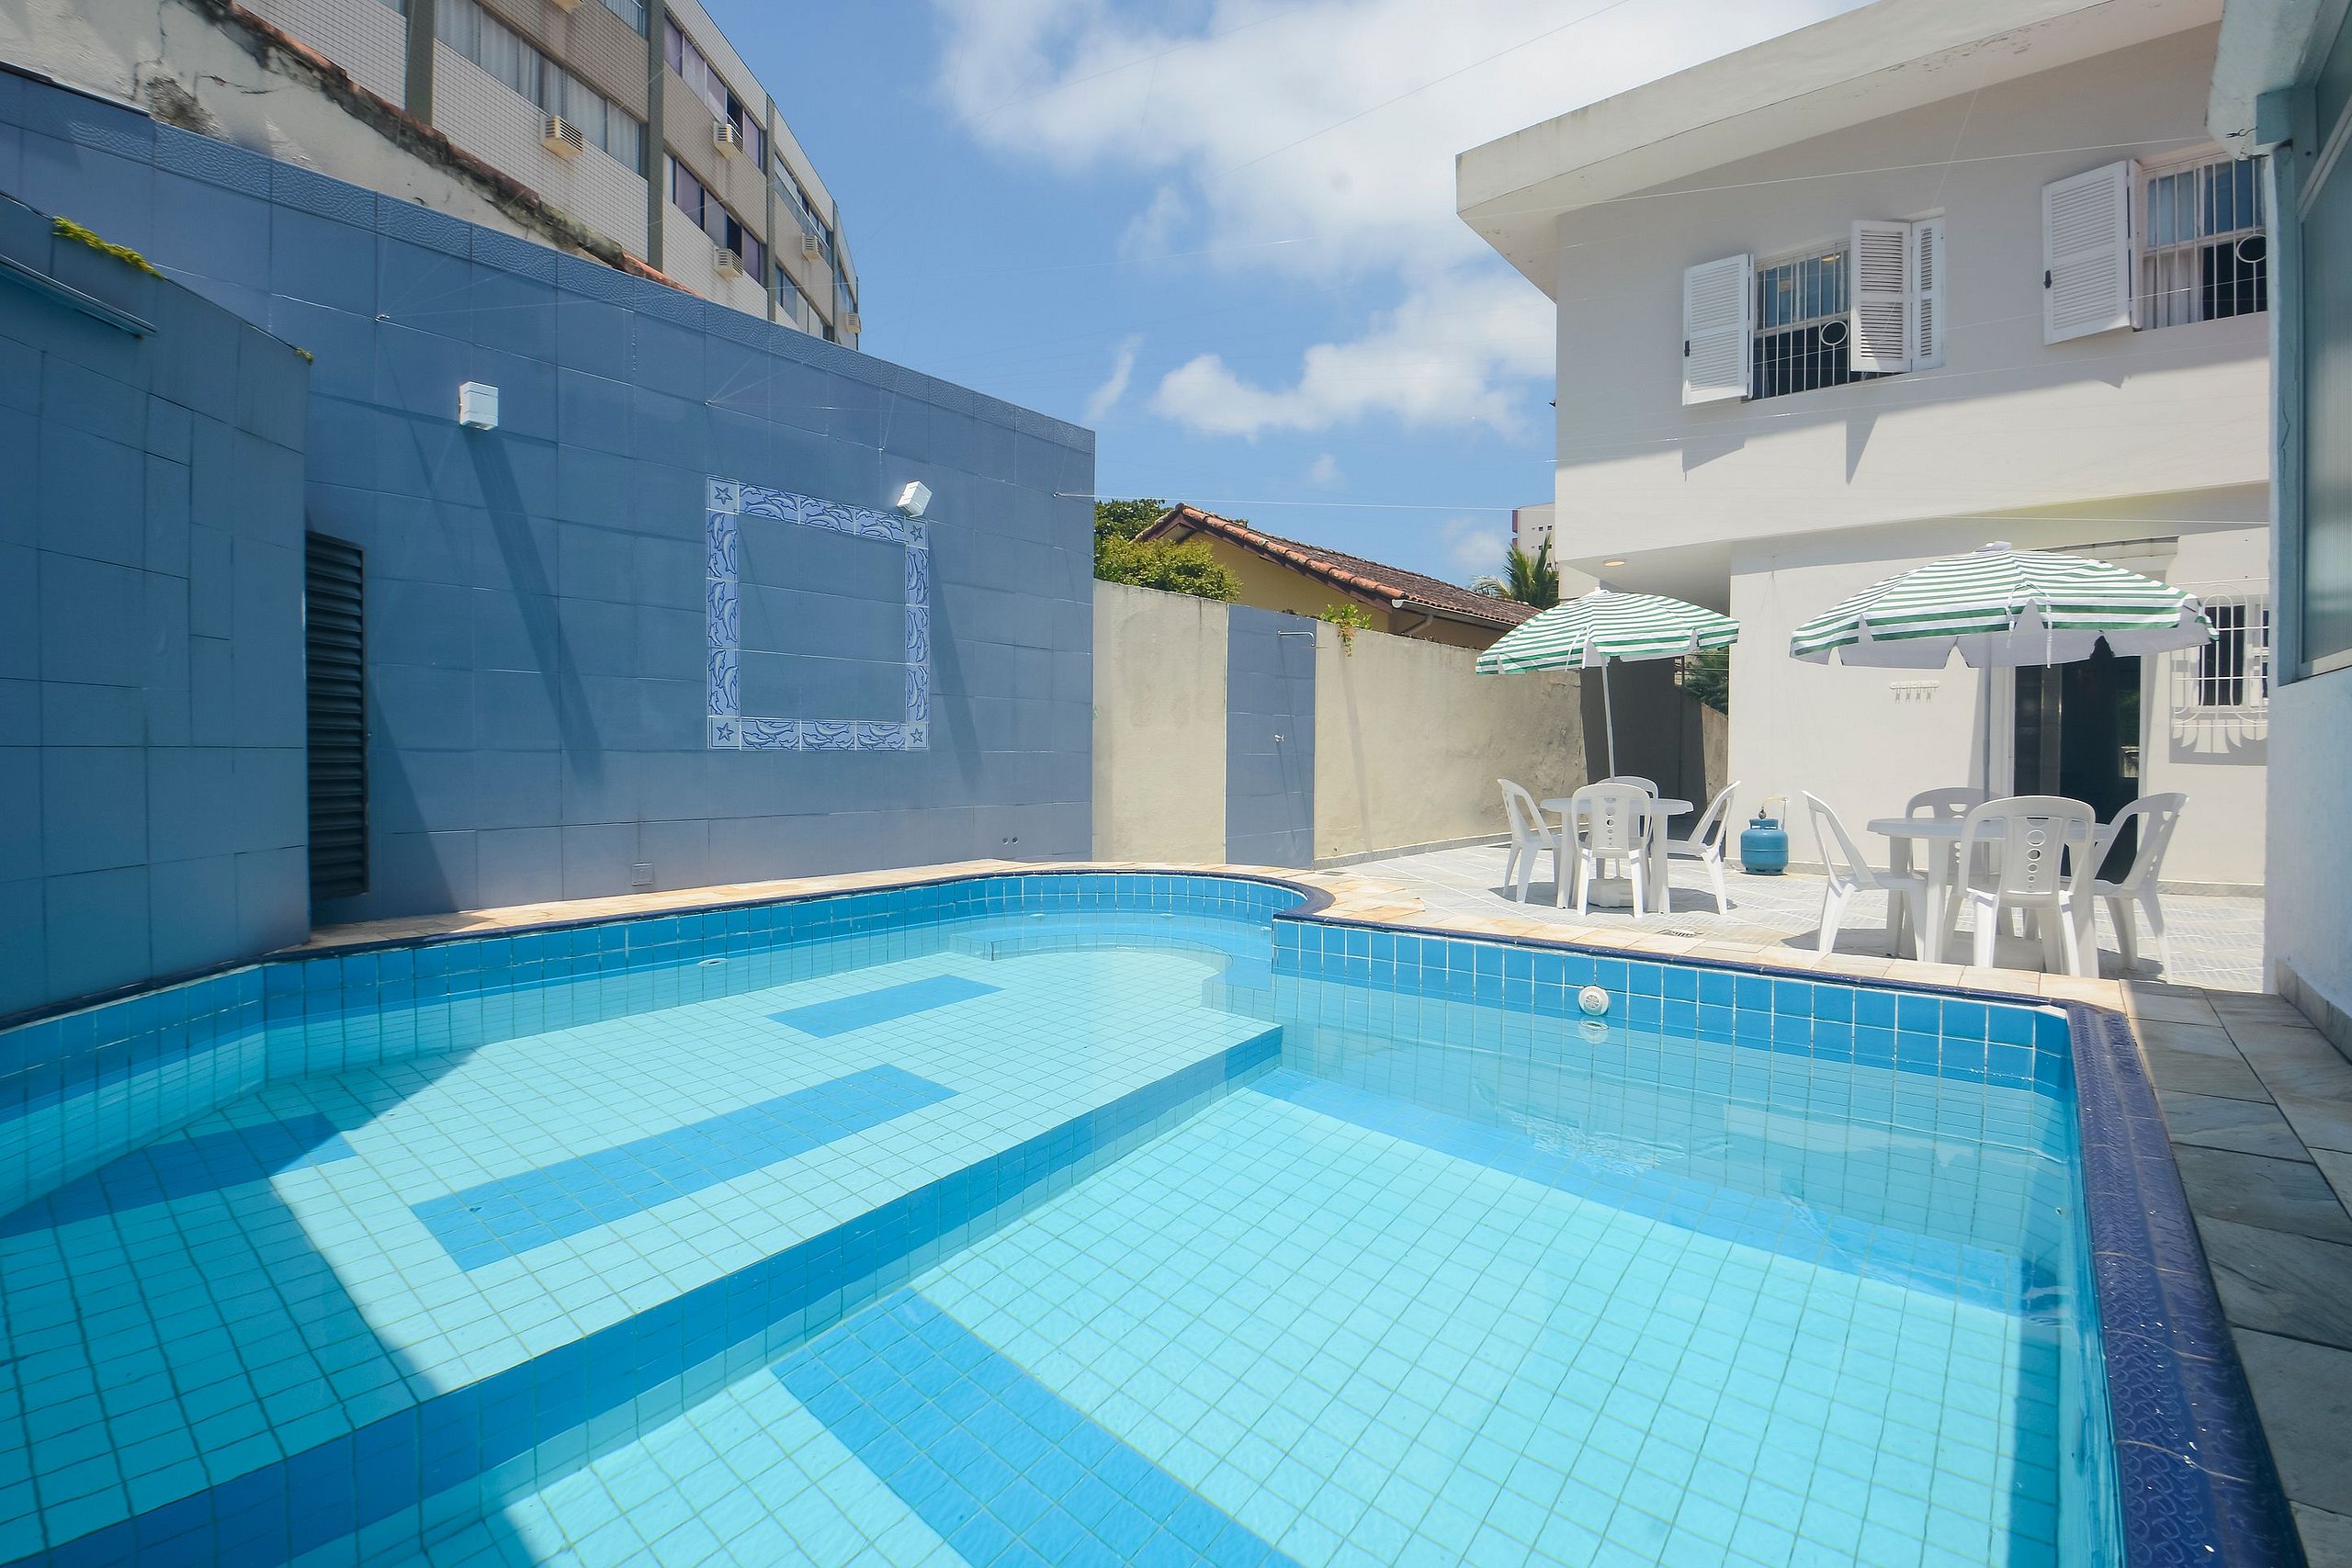 Property Image 2 - House with pool 200m from Tombo beach in Guarujá